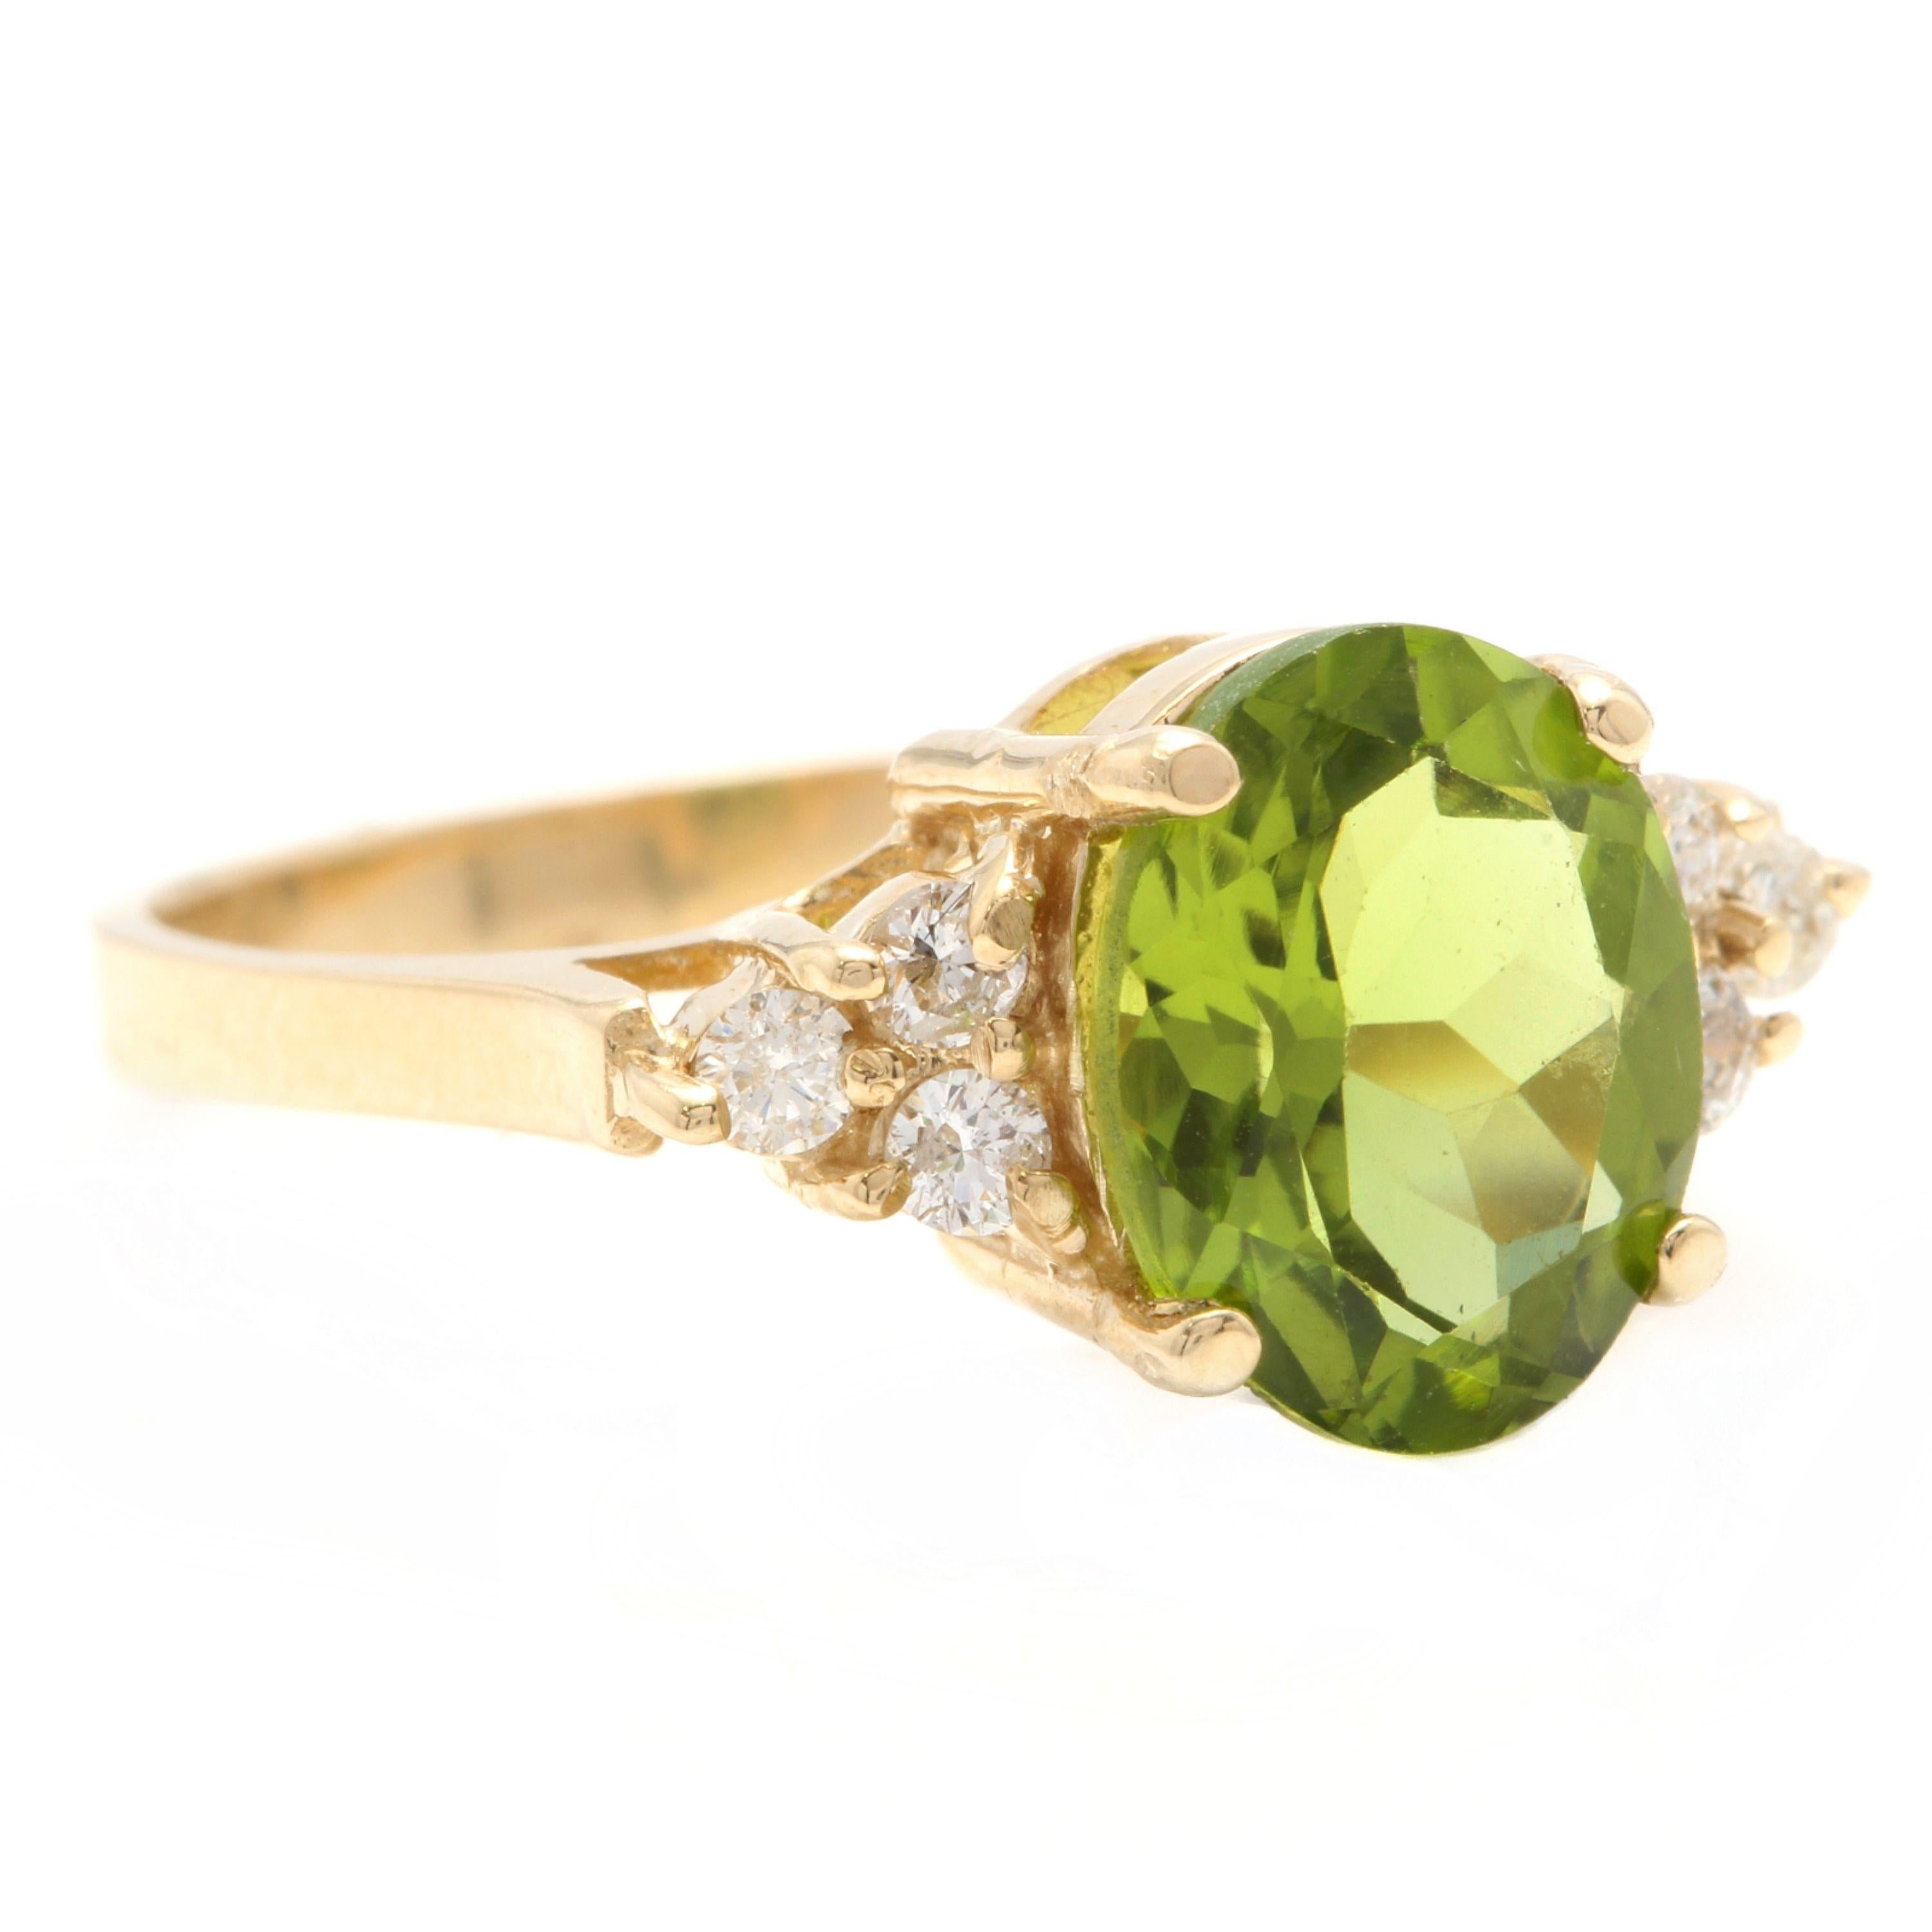 3.25 Carats Impressive Natural Peridot and Diamond 14K Yellow Gold Ring

Total Natural Peridot Weight is: Approx. 3.00 Carats

Peridot Measures: Approx. 10.00 x 8.00mm

Natural Round Diamonds Weight: Approx. 0.25 Carats (color G-H / Clarity